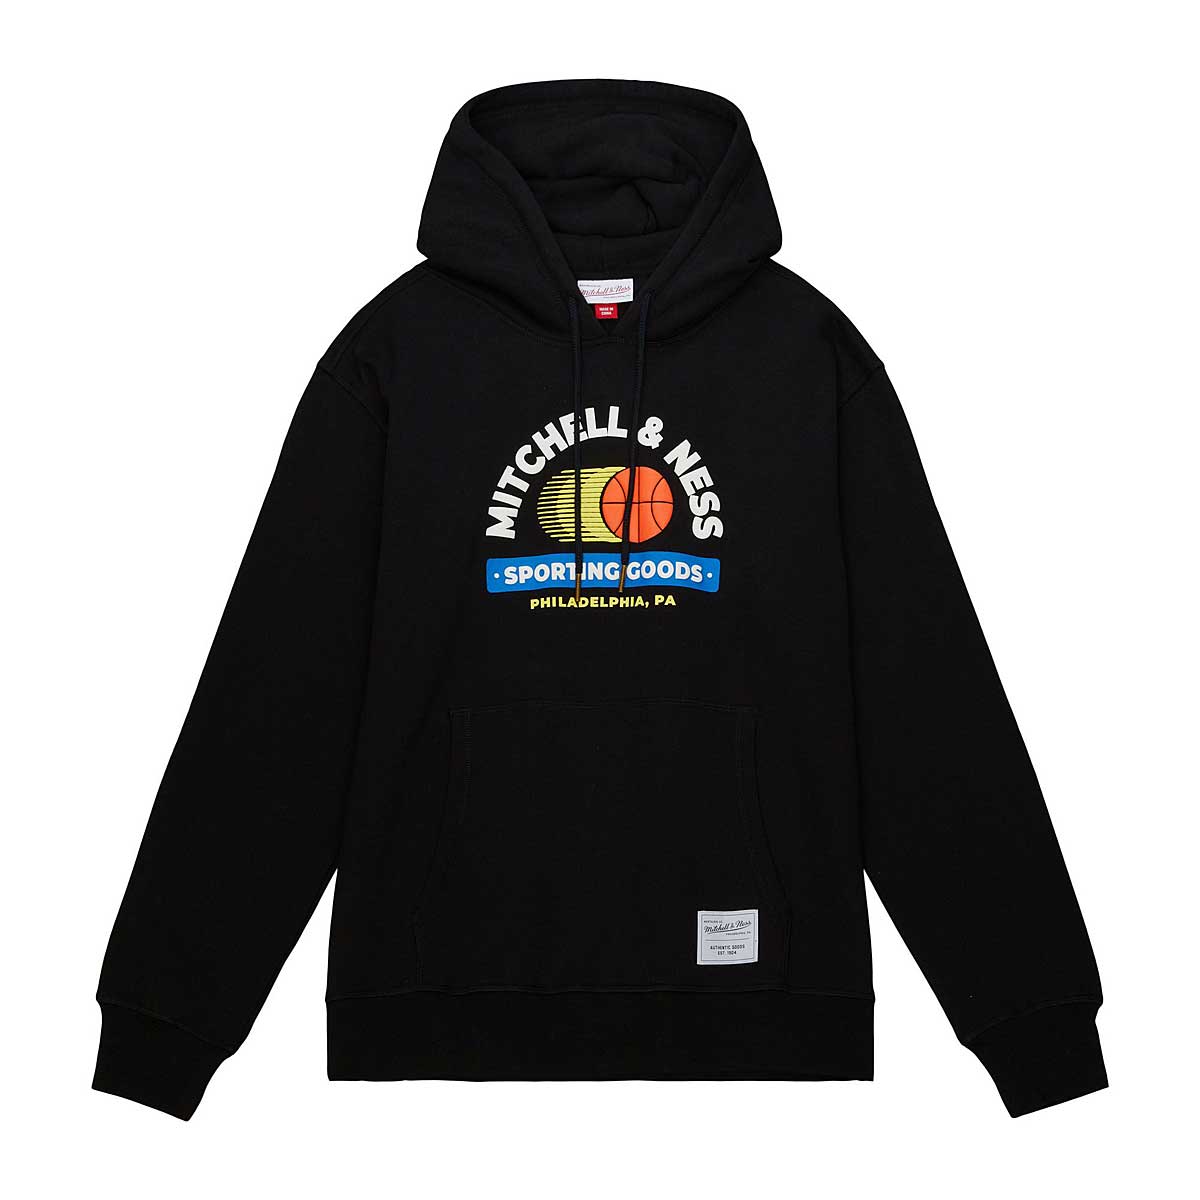 Image of Mitchell And Ness Branded M&n Sporting Goods Hoody, Black